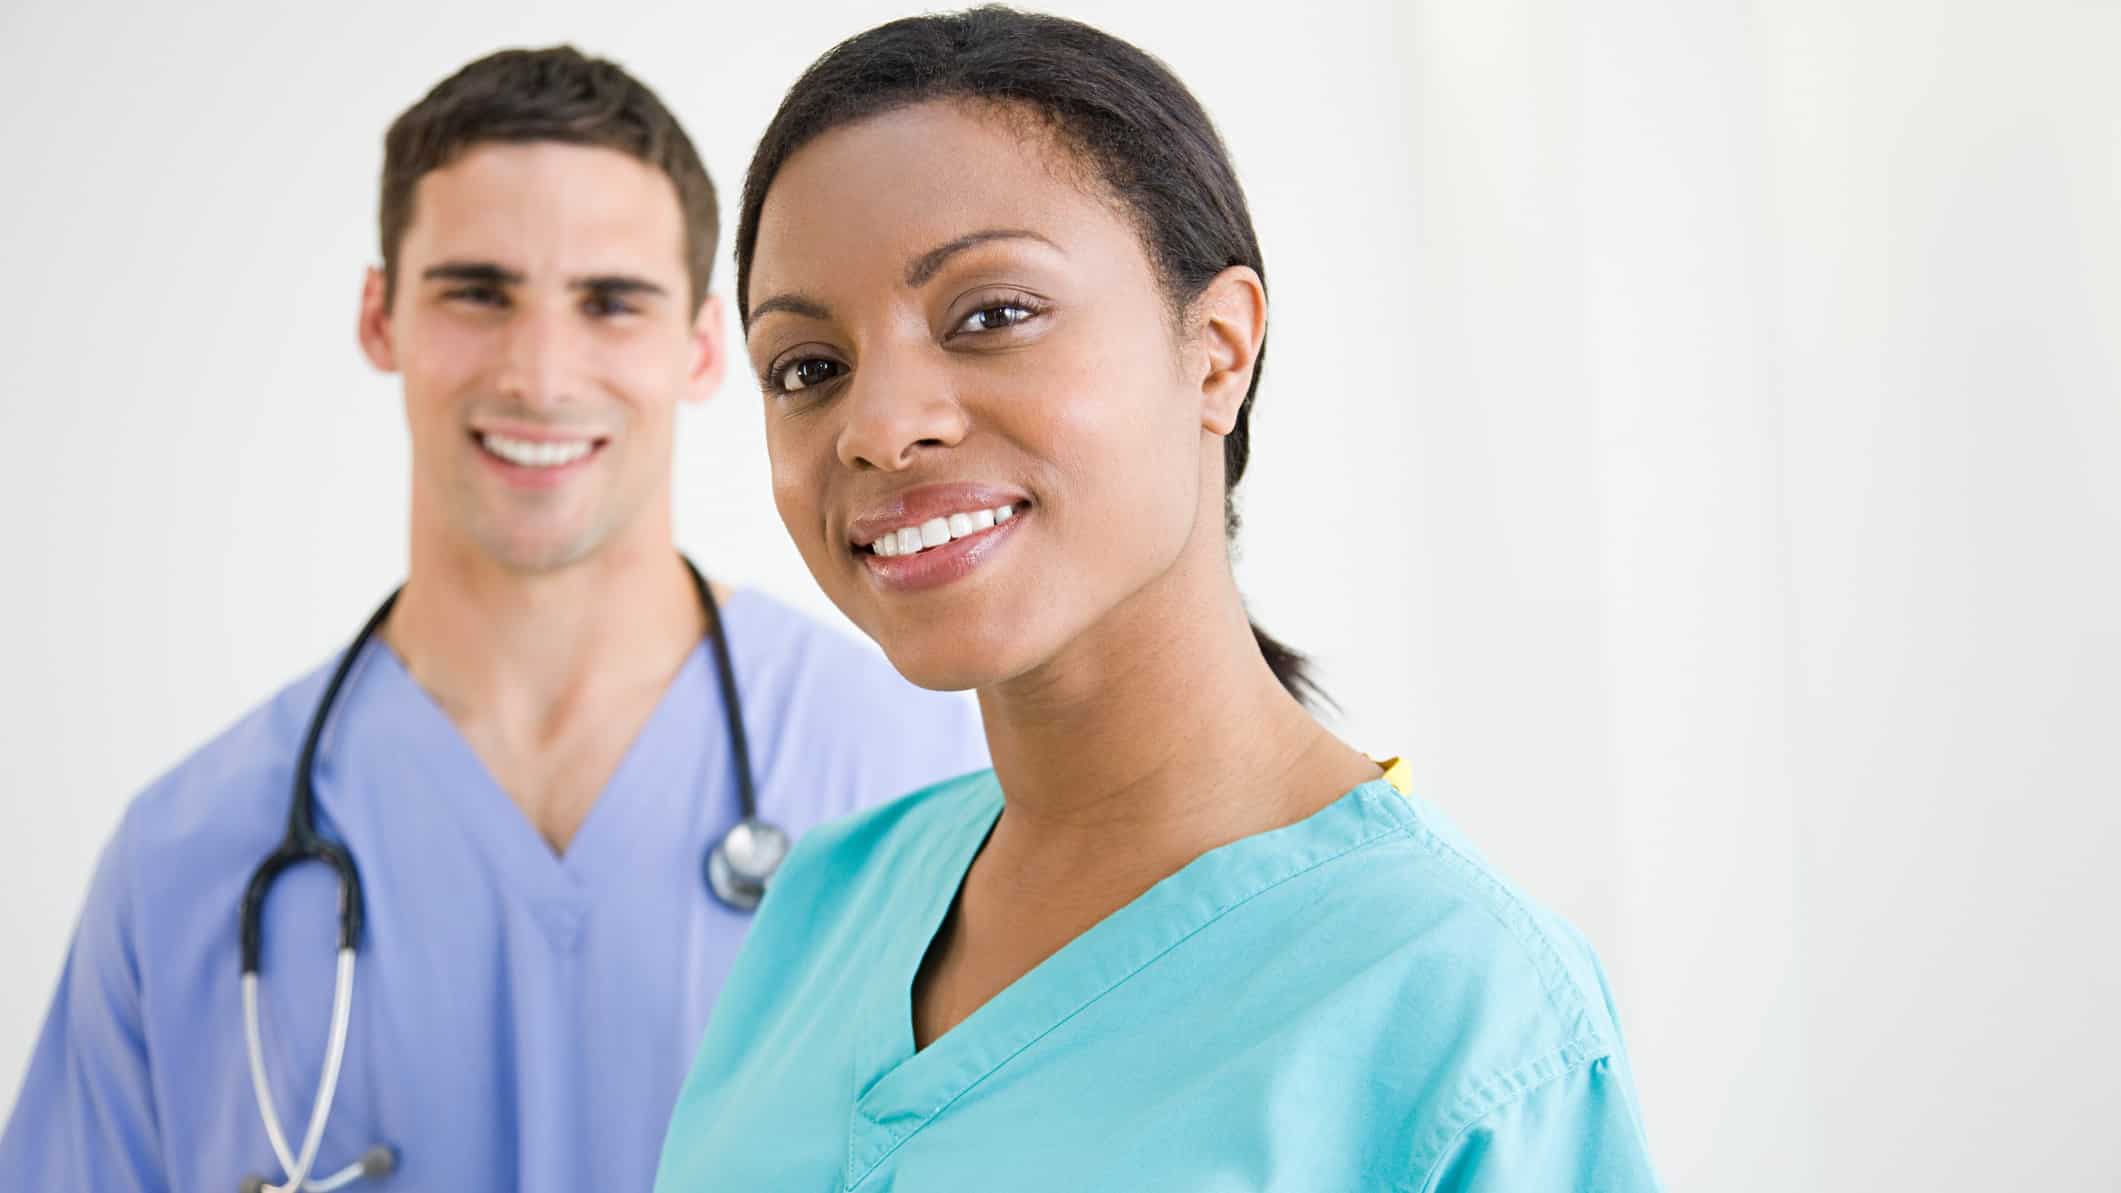 Two healthcare workers, a male doctor in the background with a woman in scrubs in the foreground,, smile towards the camera against a plain backdrop.